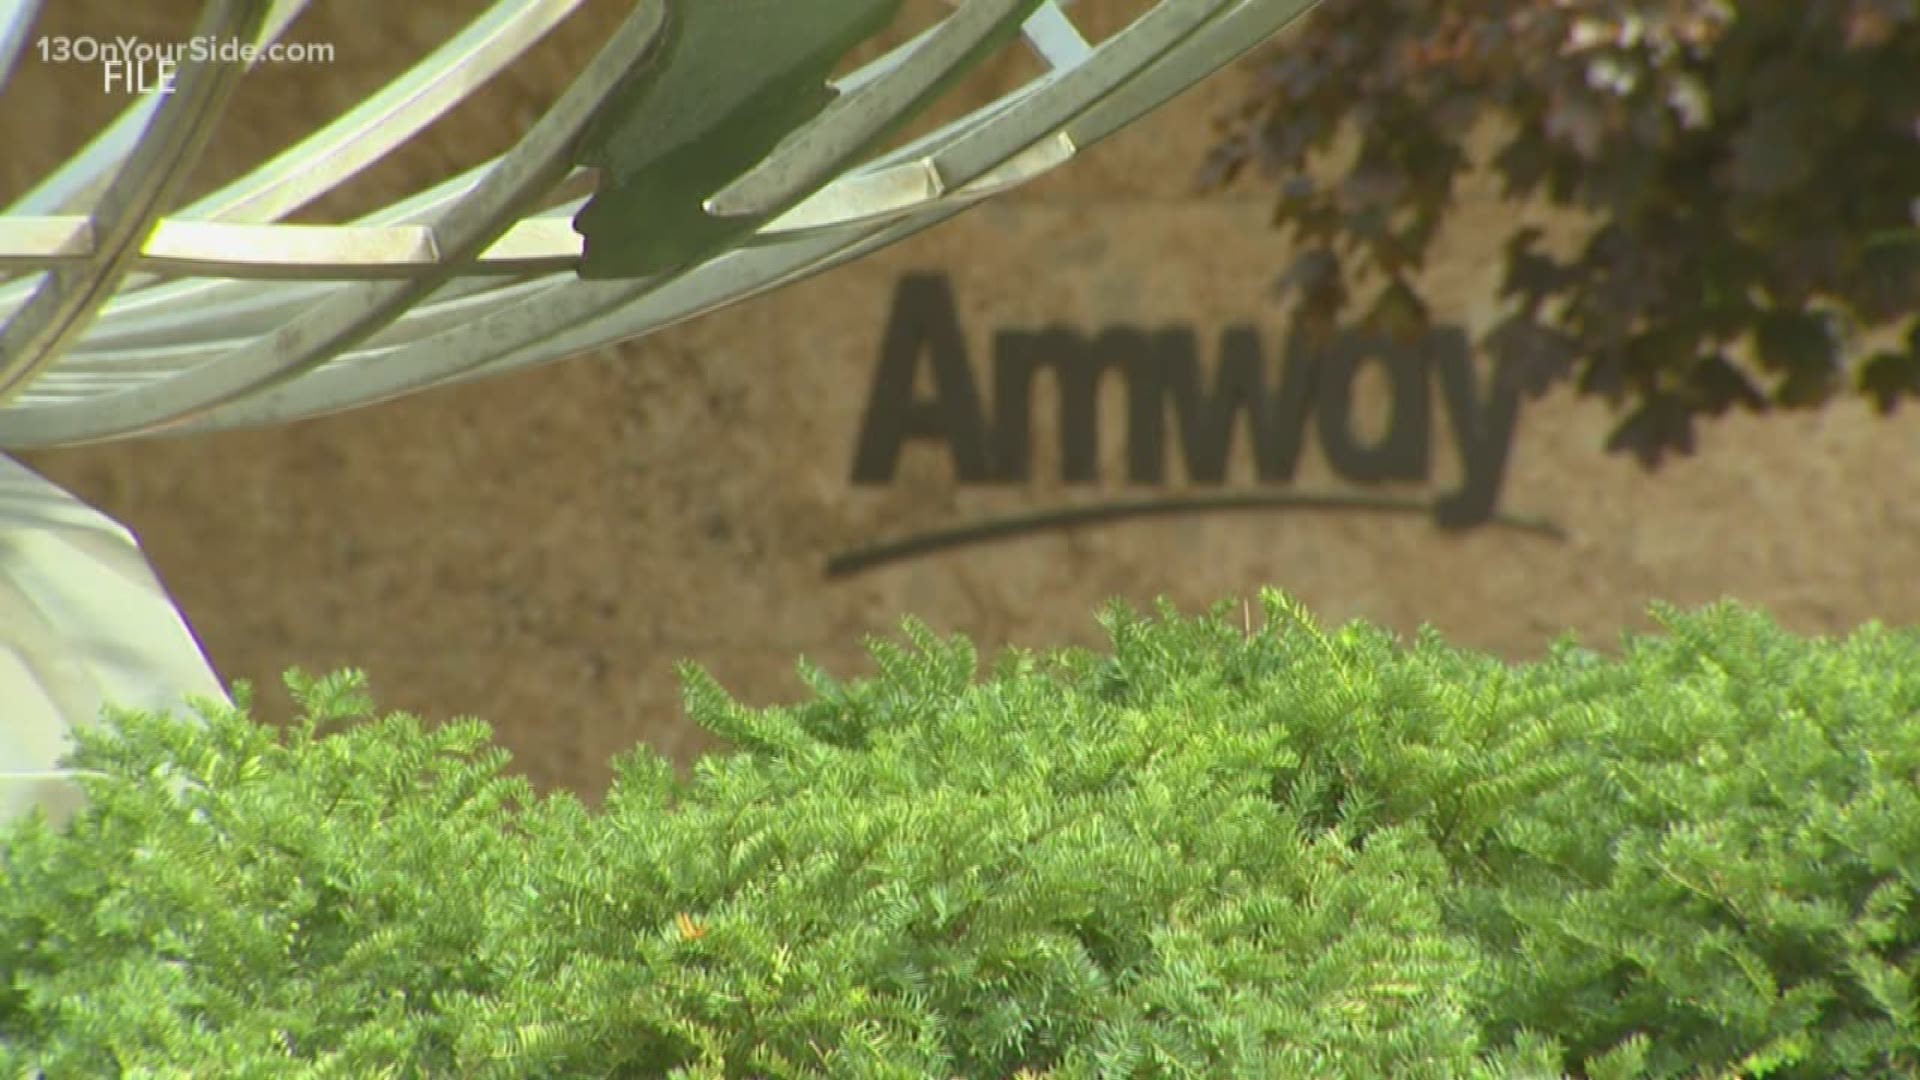 Direct selling giant Amway announced 50 job cuts Wednesday from the company's Marketing and Research and Development Departments.